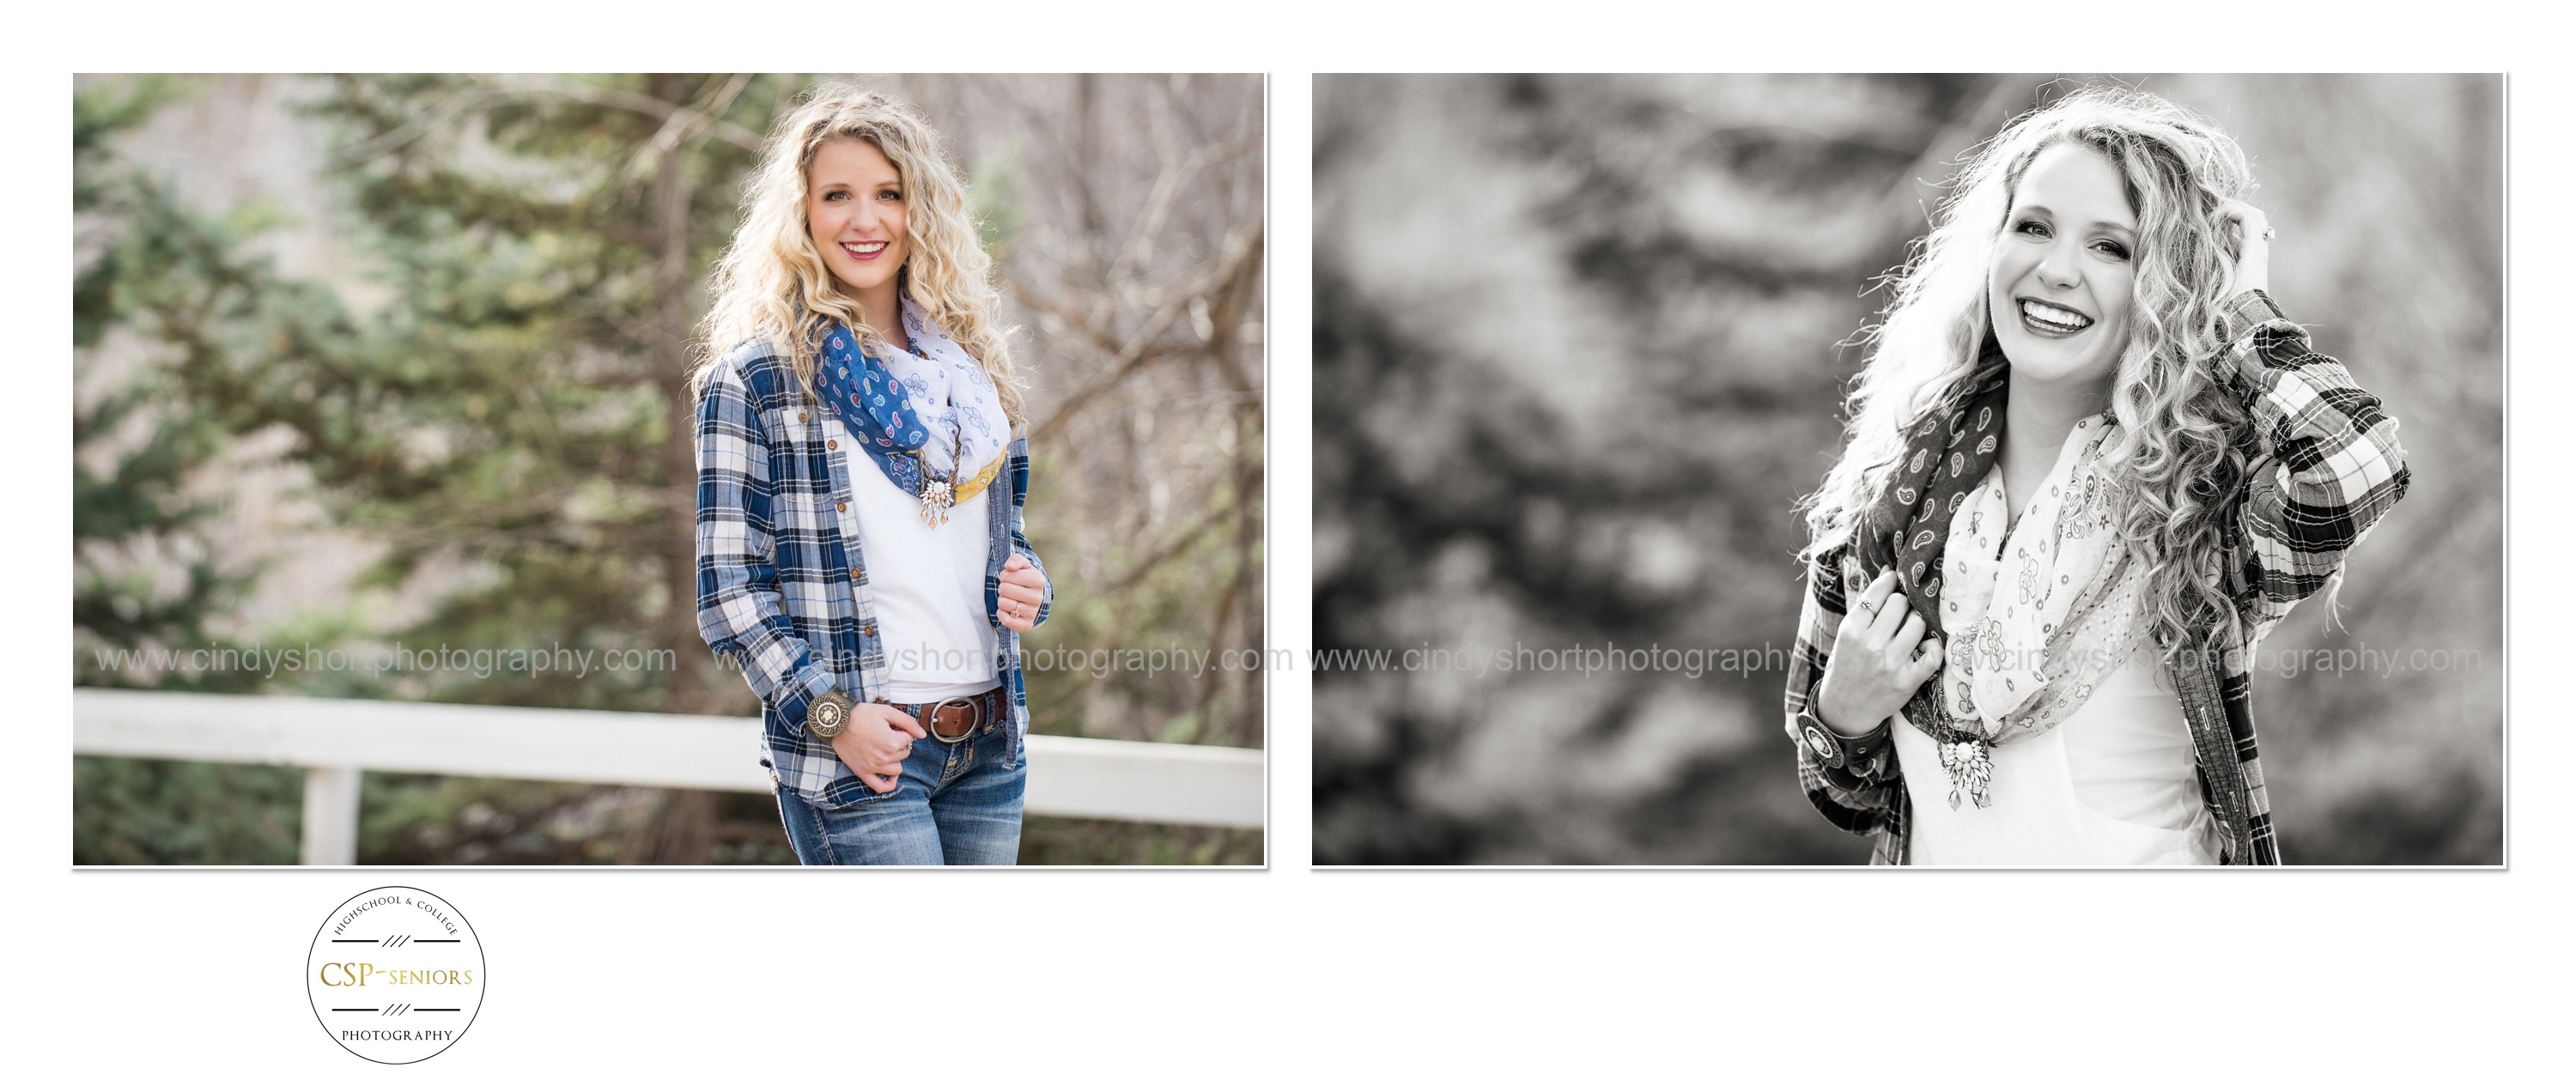 Style ReDefined Senior Chandler - Cindy Short Photography